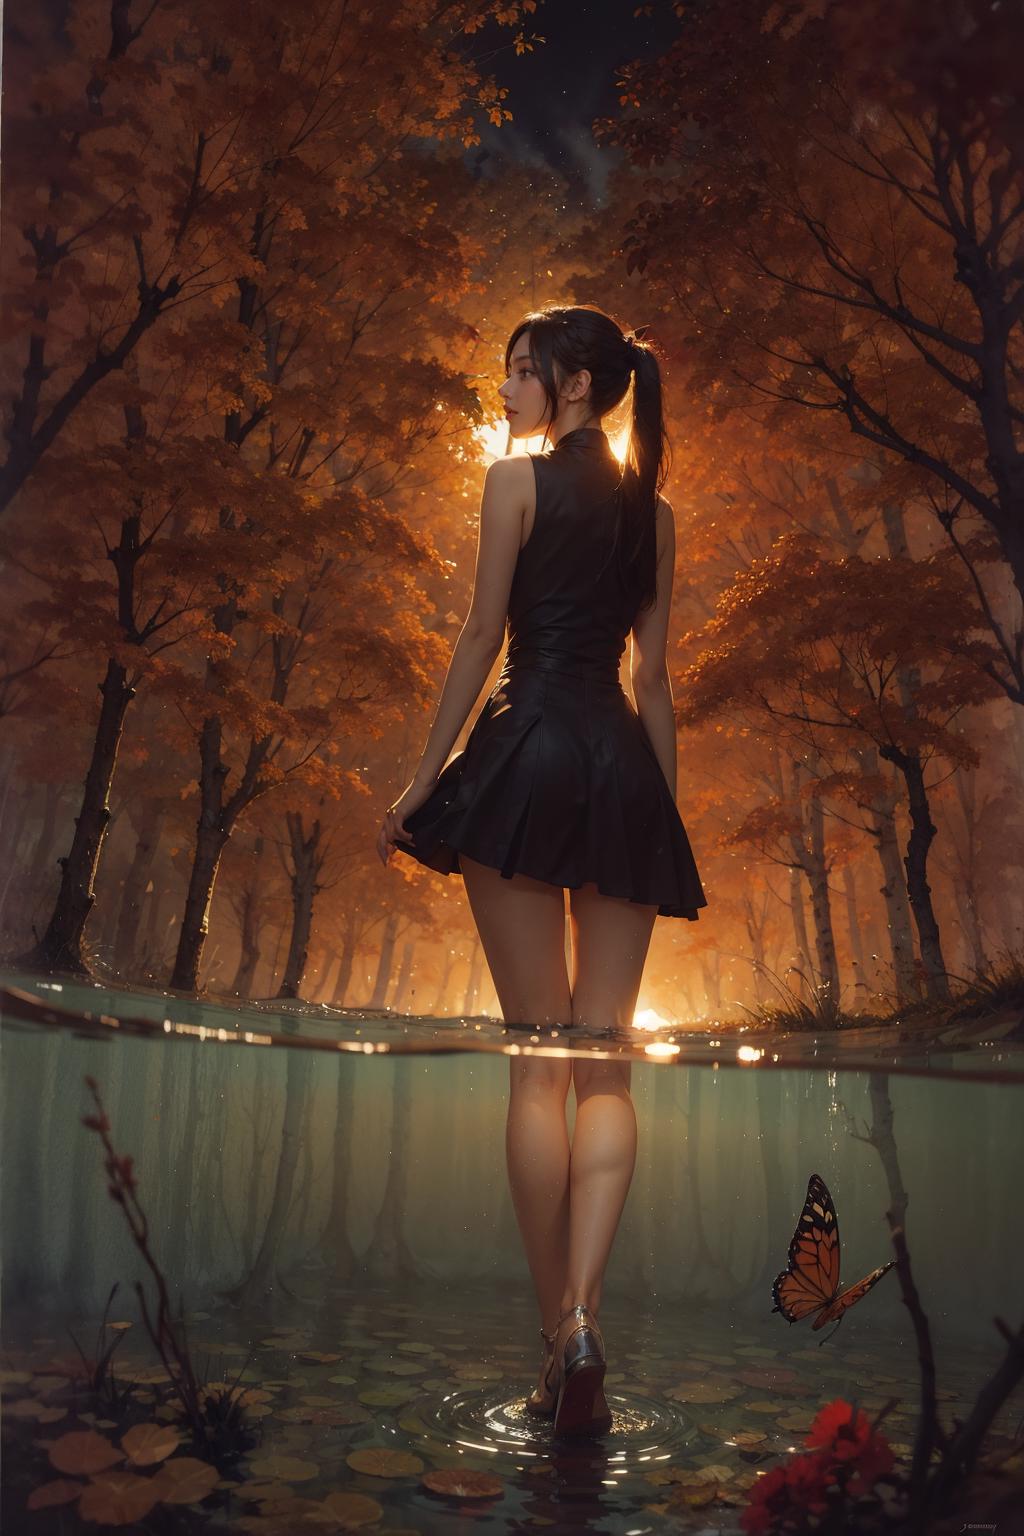 A woman in a black dress stands in water, surrounded by a forest and a butterfly nearby.